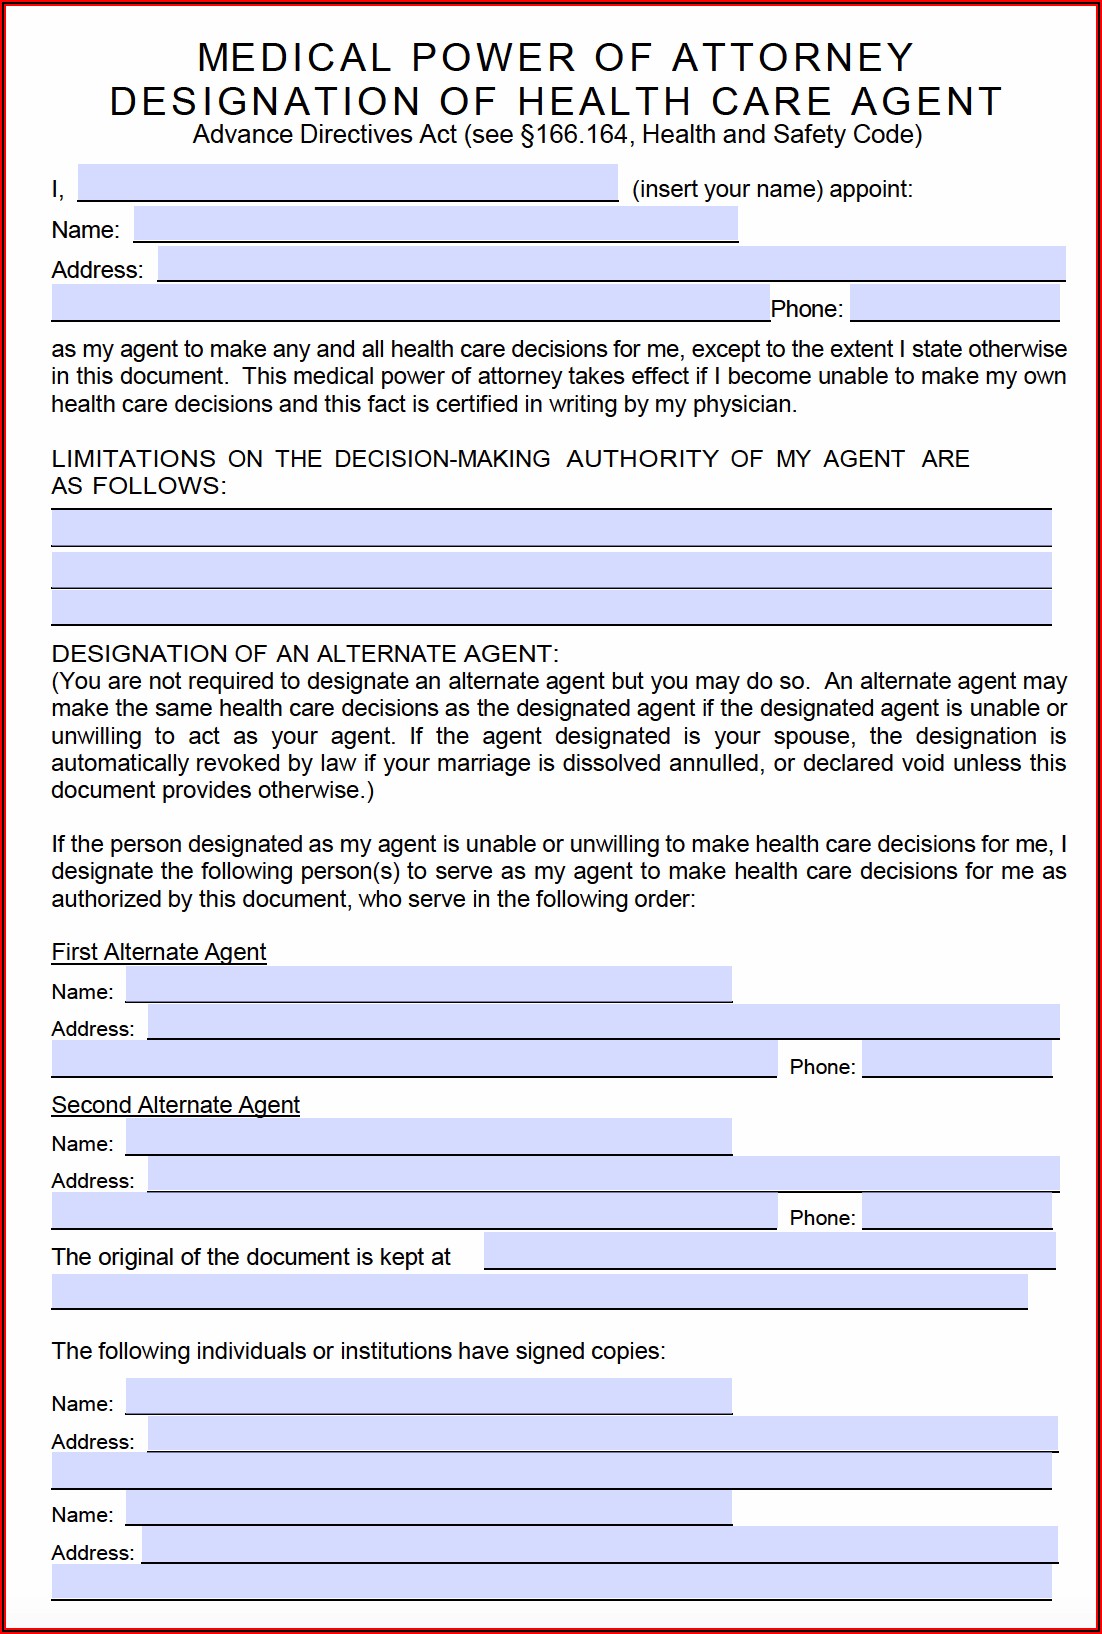 Where Can I Get A Blank Medical Power Of Attorney Form